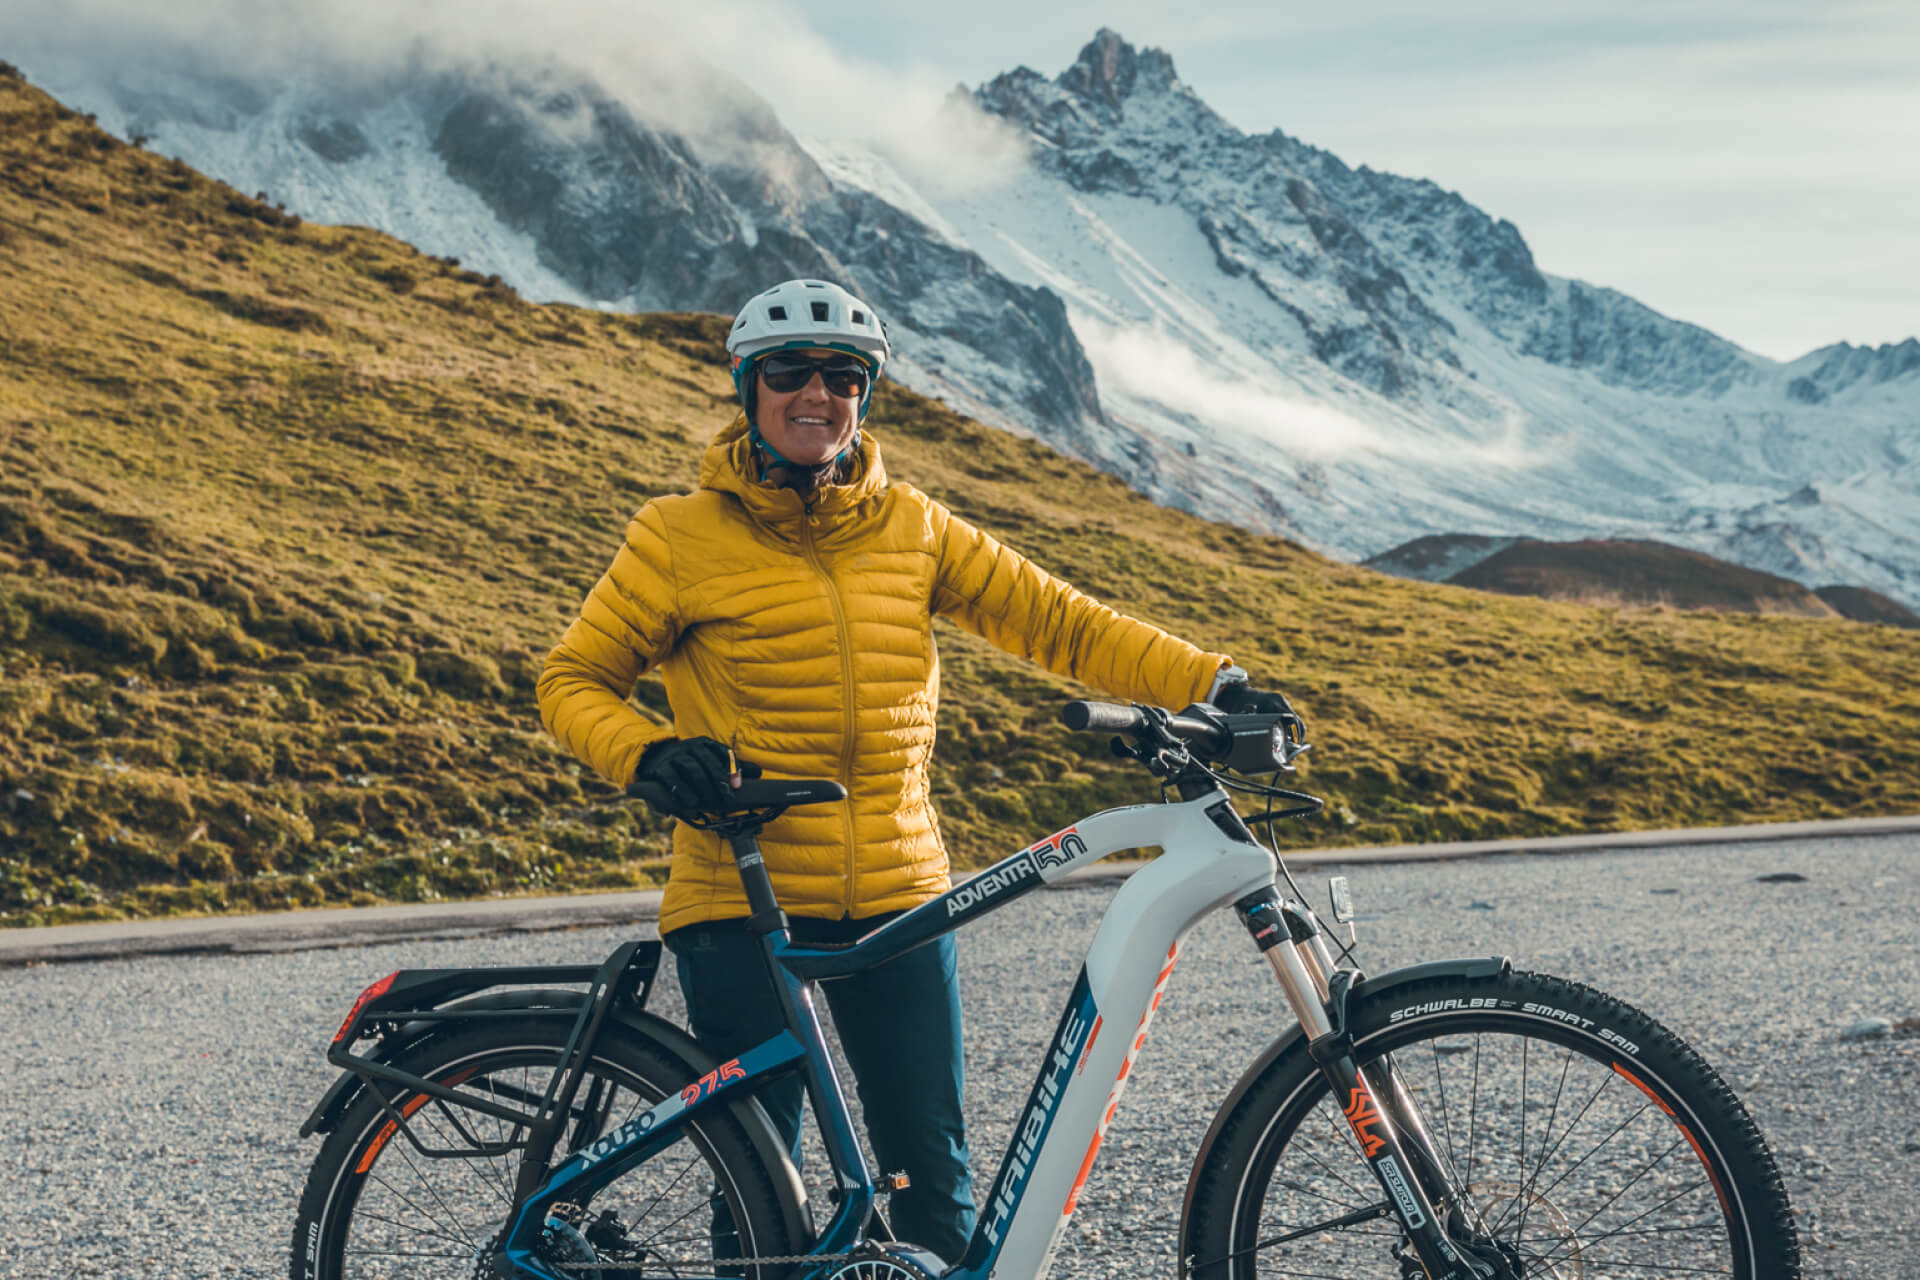 Haibike Hero Liv Sansoz and the Adventr 5.0 Trekking eBike in the mountains